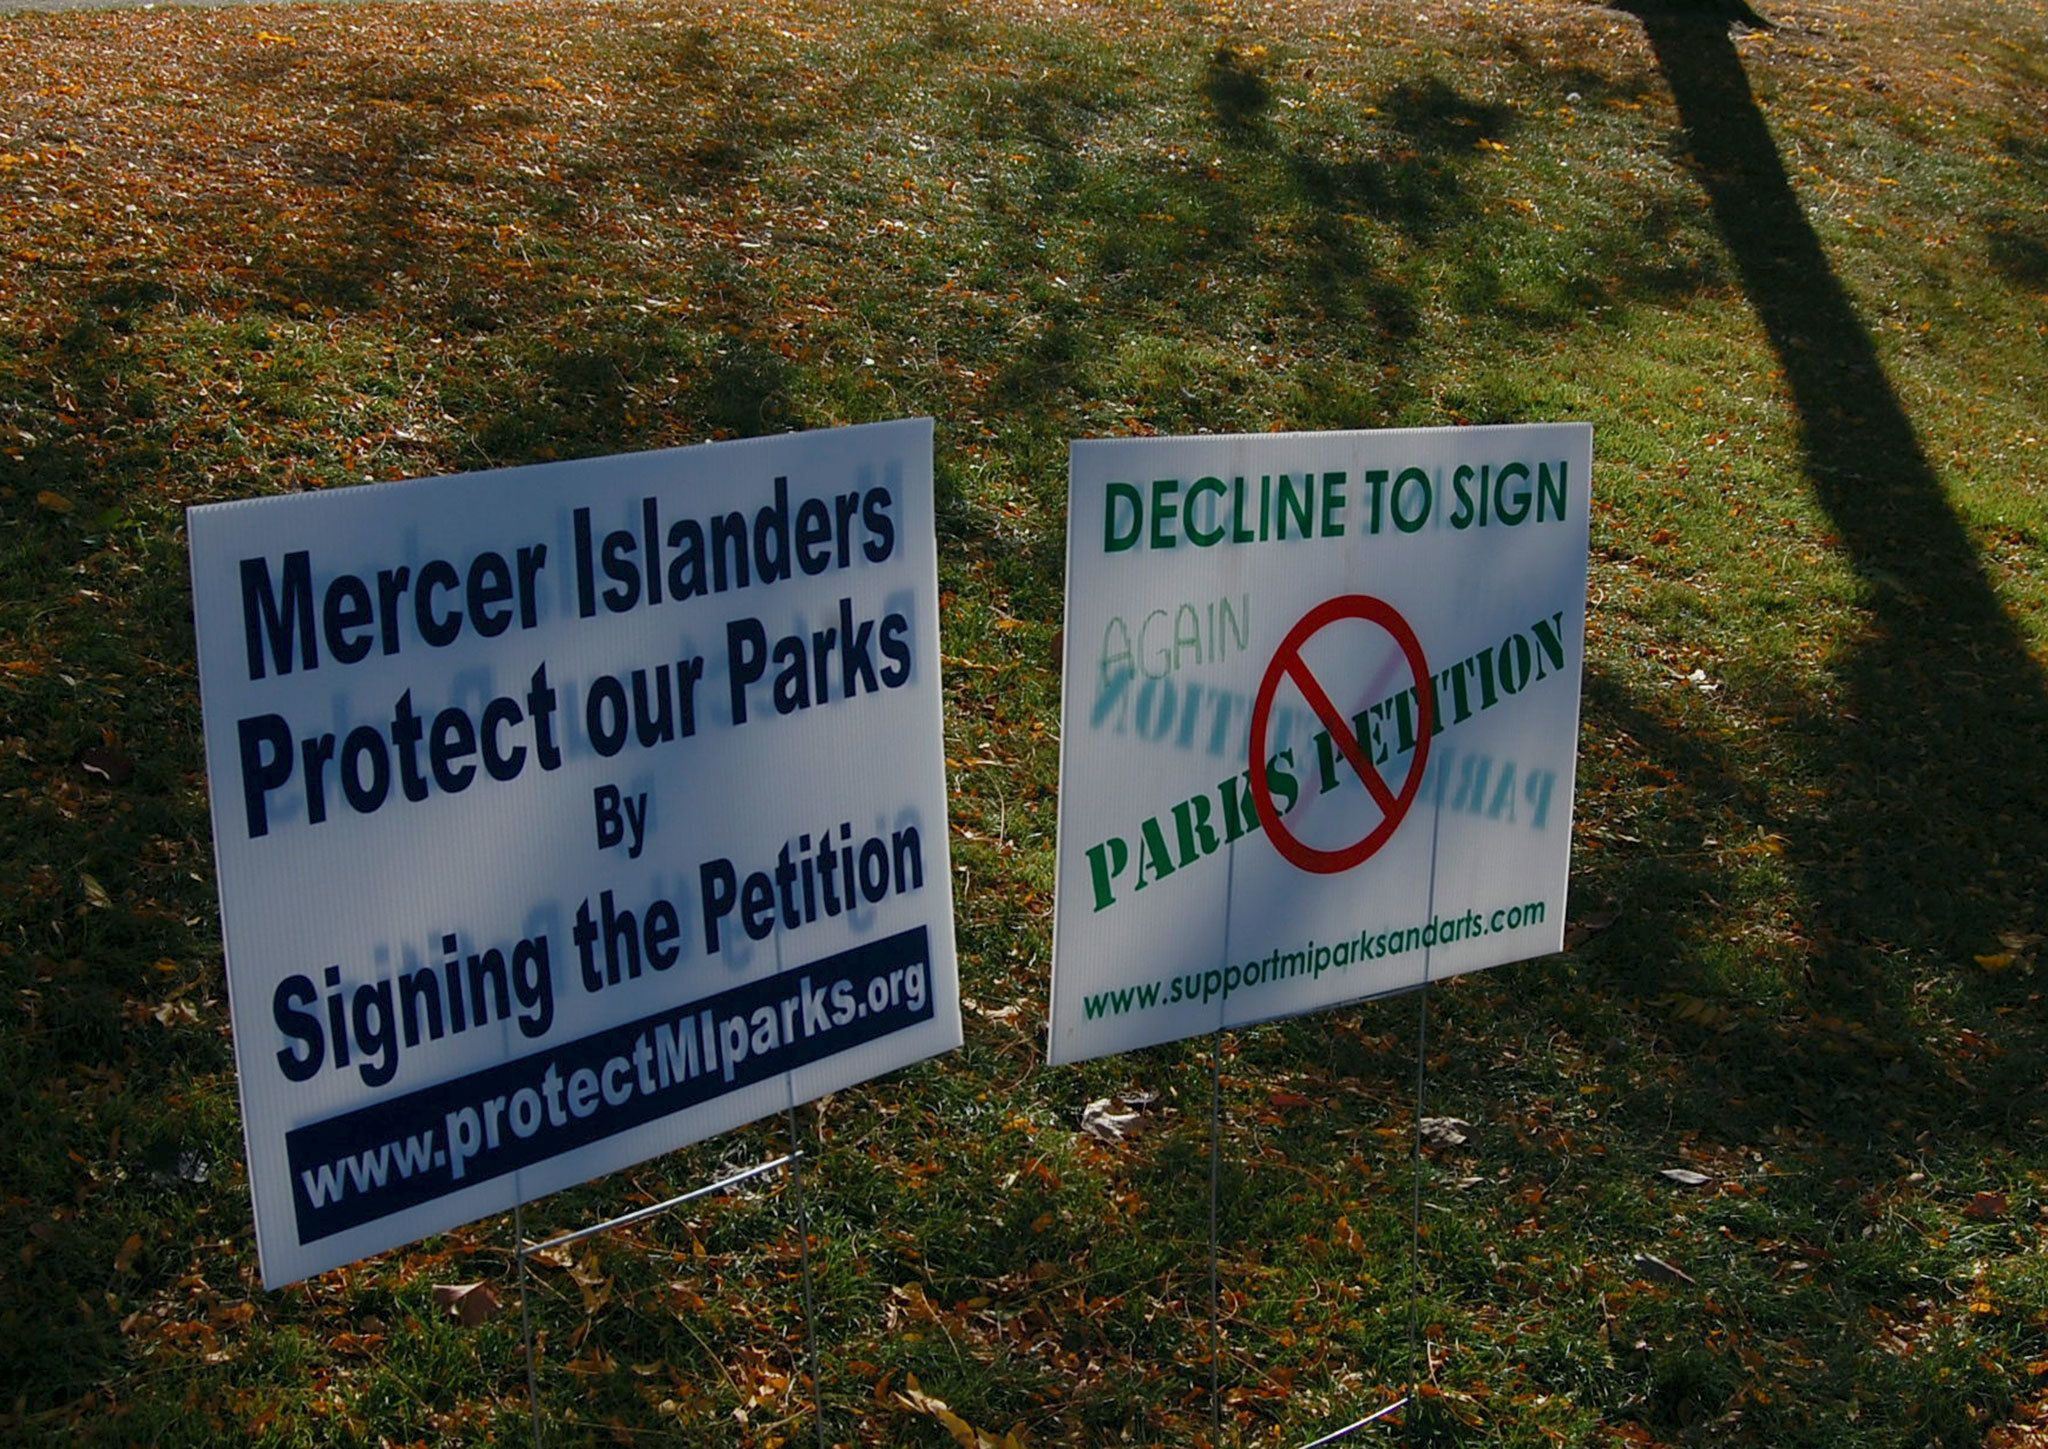 Petitions to protect Island parks from development, including the planned Mercer Island Center for the Arts (MICA) in Mercerdale Park, sparked a controversy in the community. Katie Metzger/staff photo